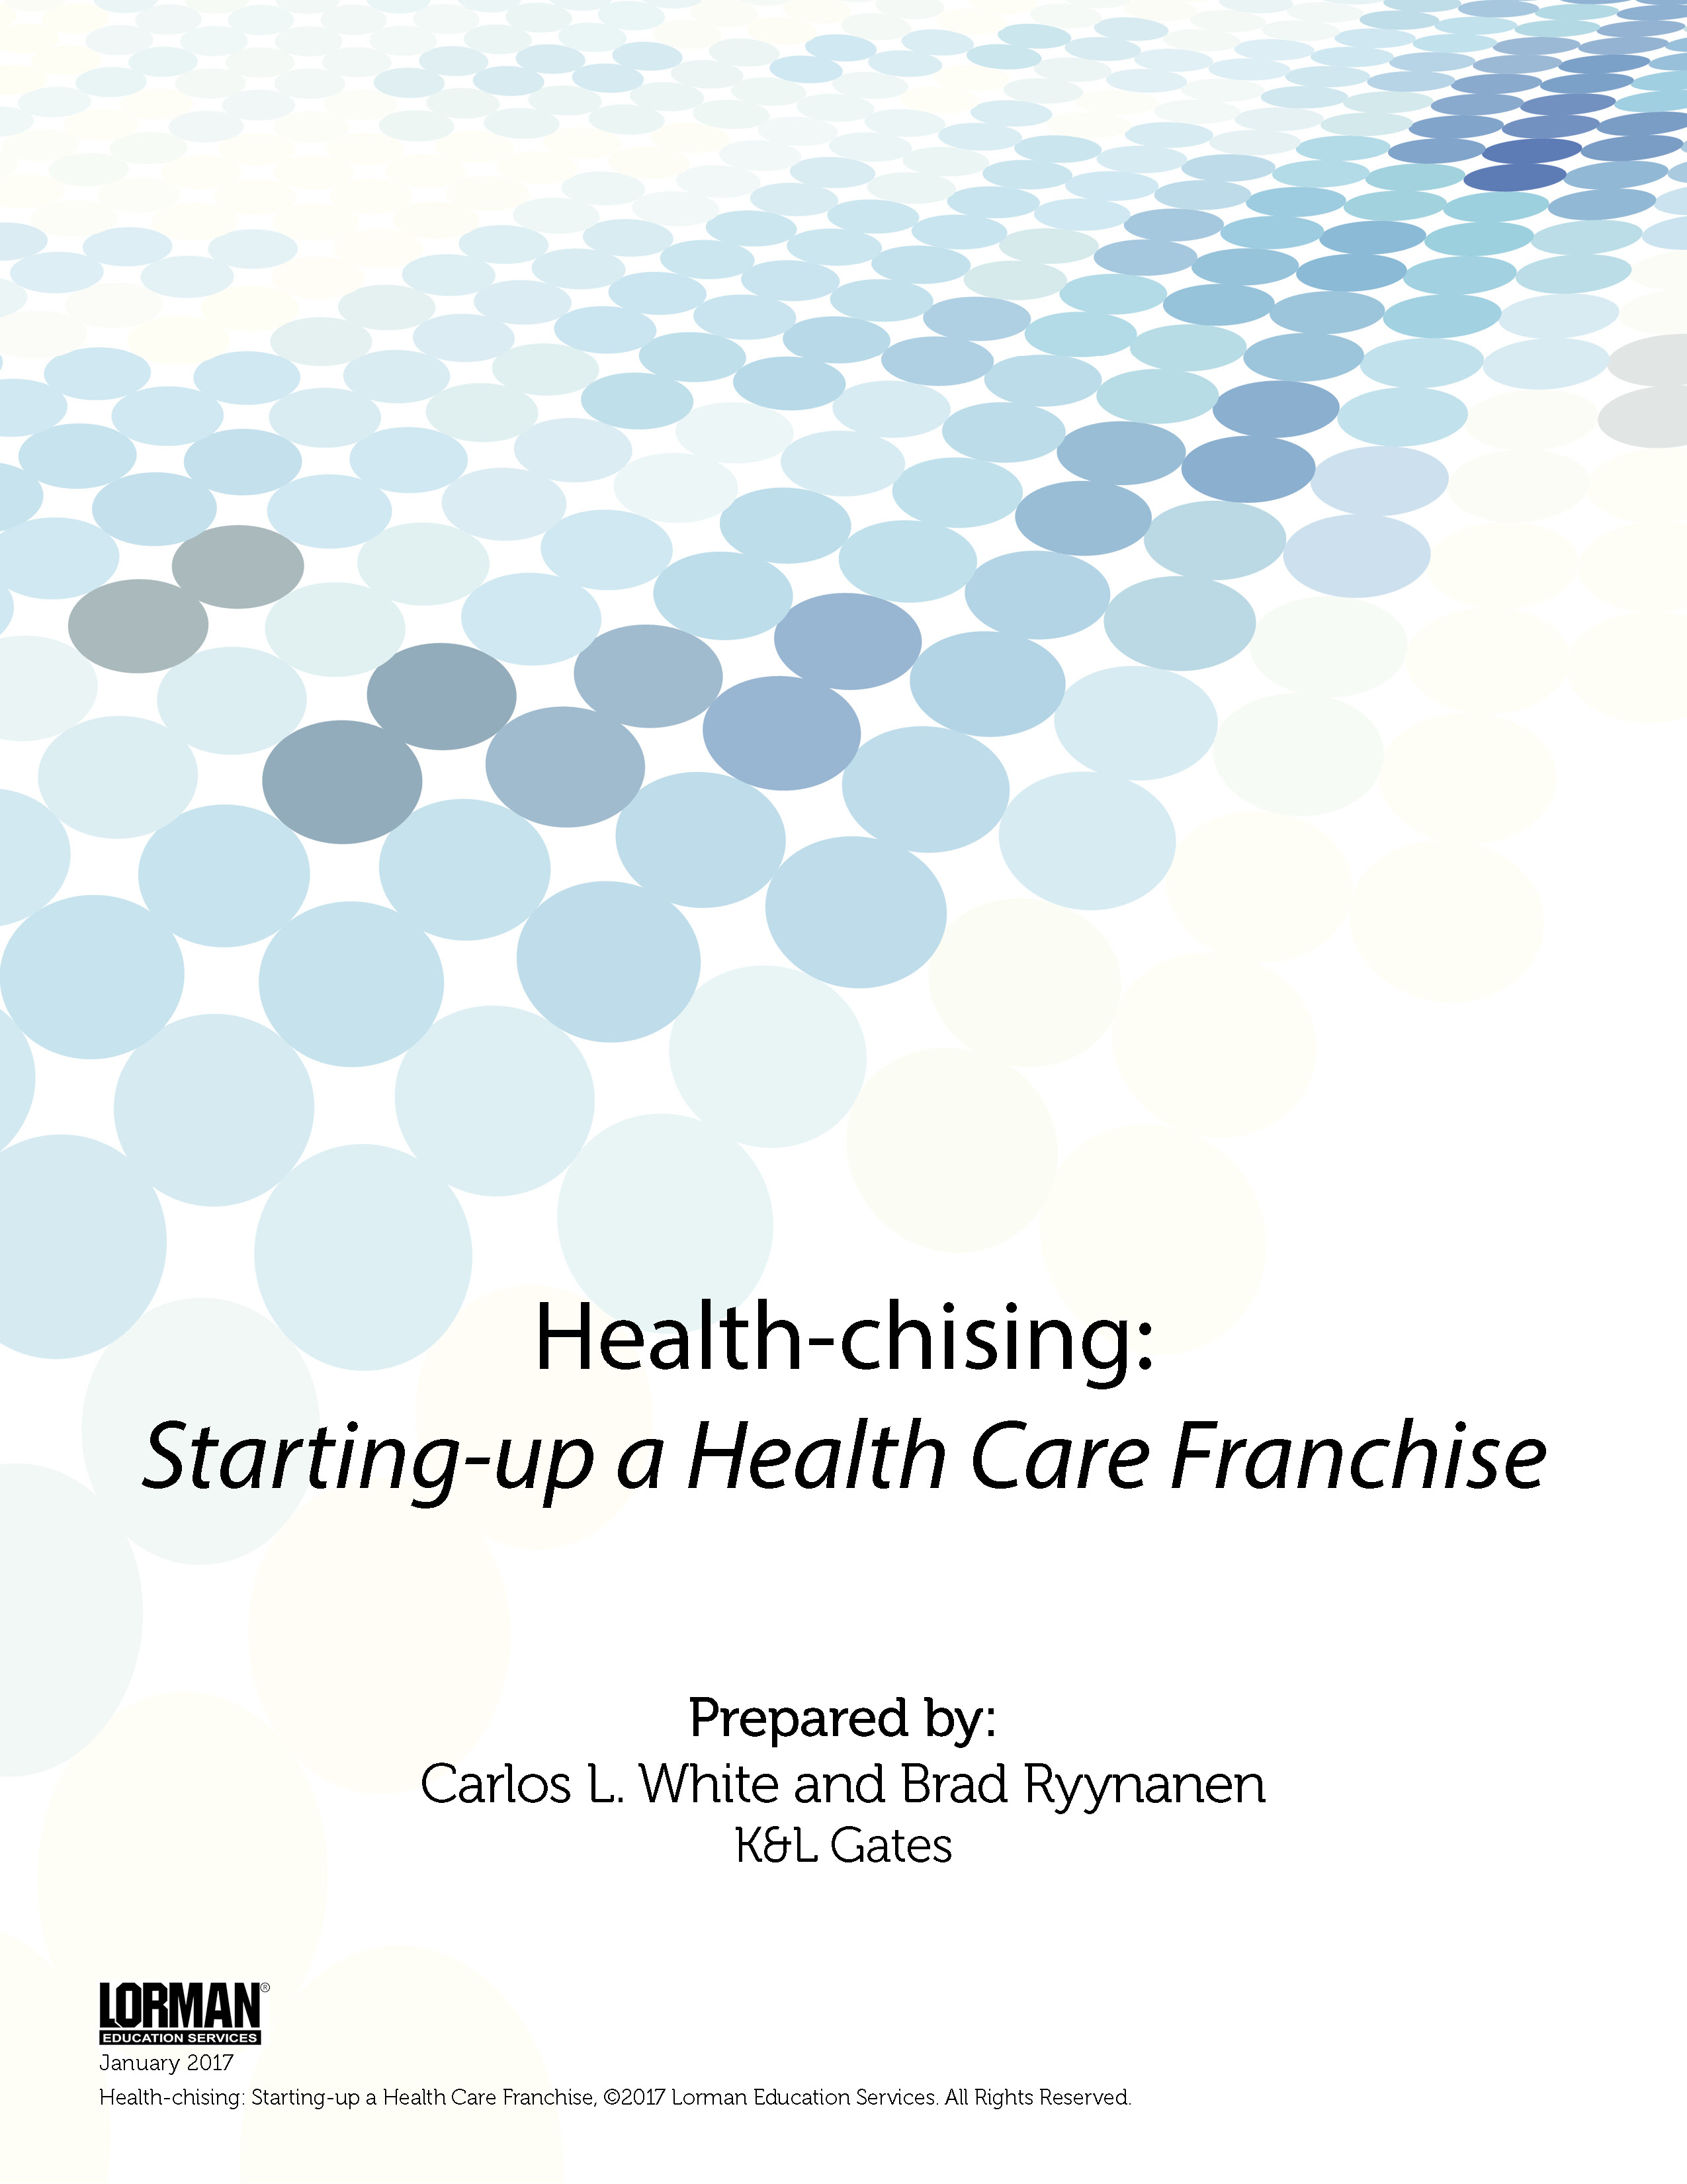 Health-chising: Starting-up a Health Care Franchise